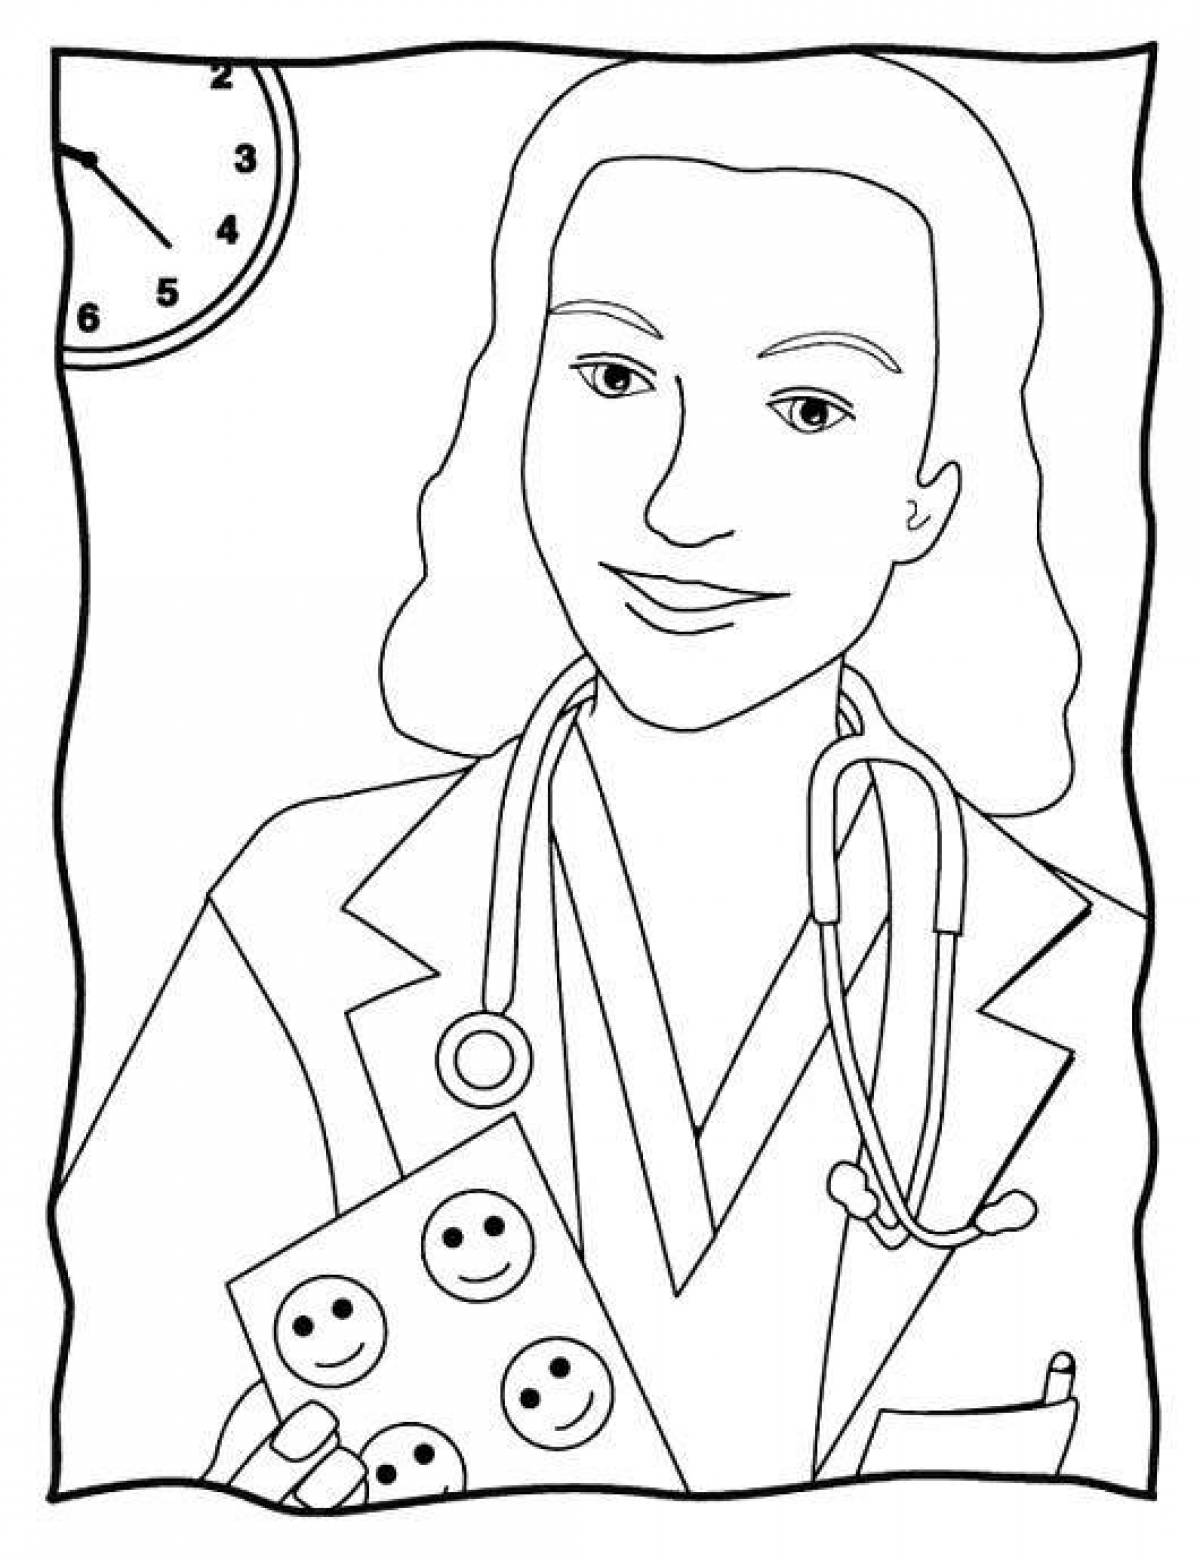 Doctor figurine coloring page